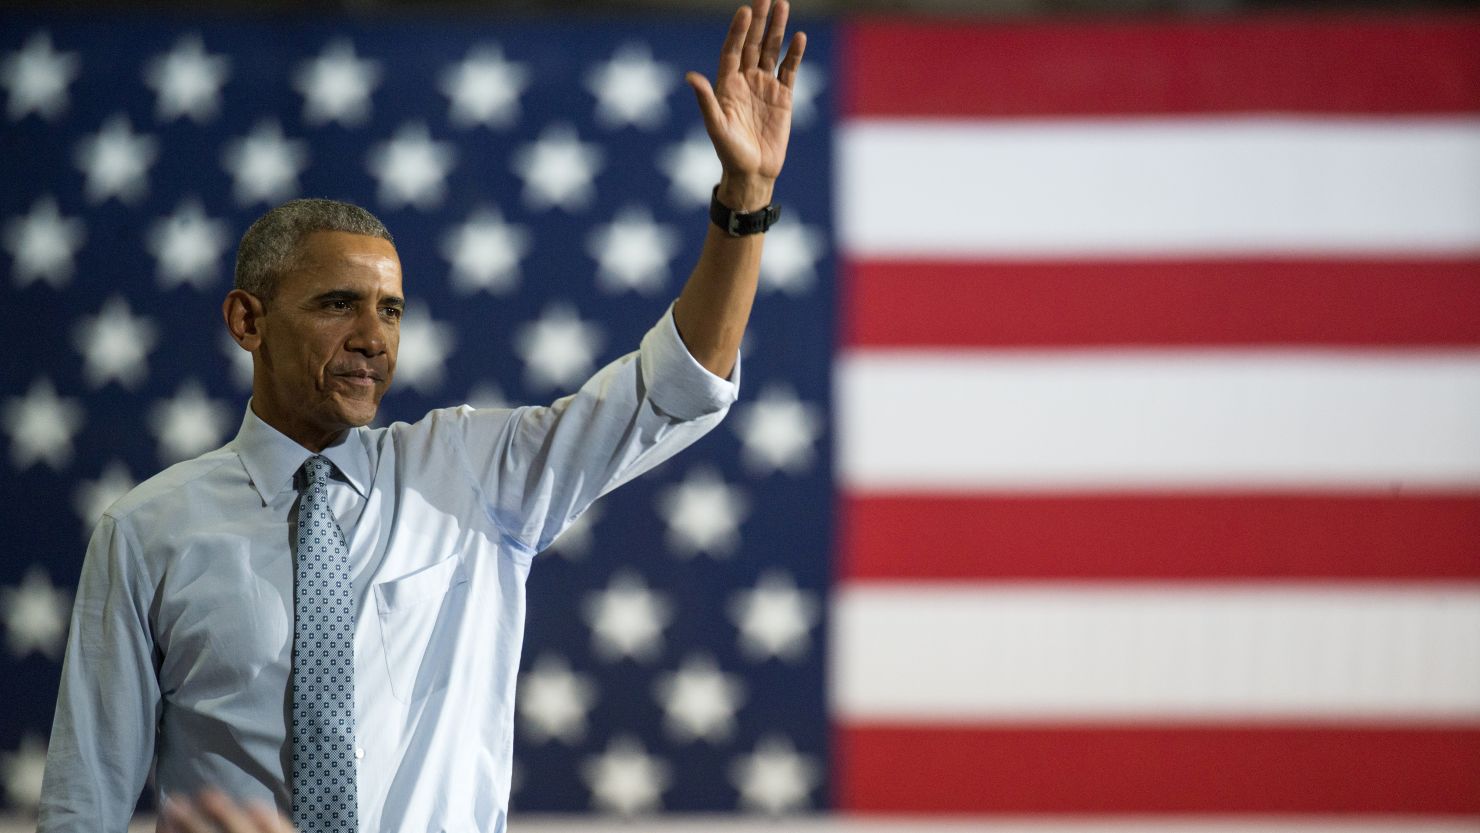 President Barack Obama waves to the crowd after speaking during a campaign event for Hillary Clinton at Capital University on November 1, 2016 in Columbus, Ohio.